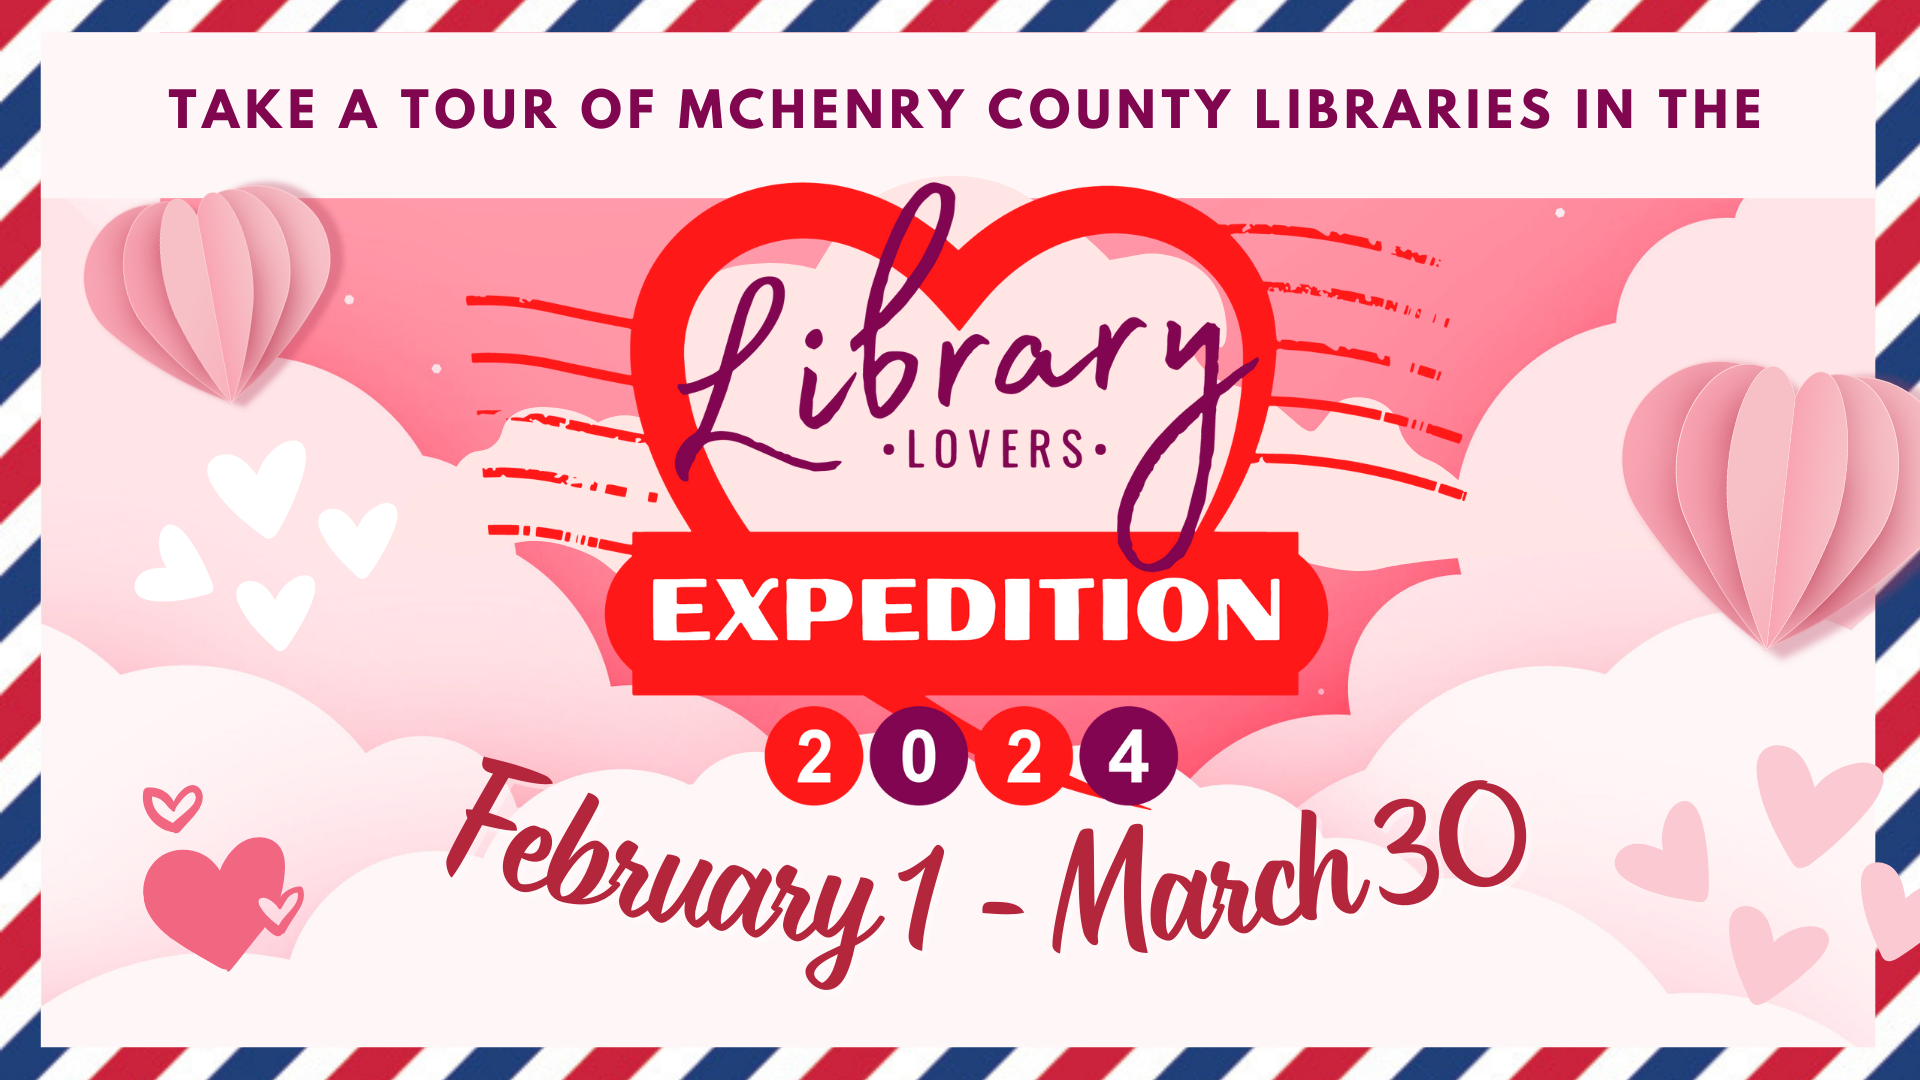 Brochure advertising the Library lovers Expedition